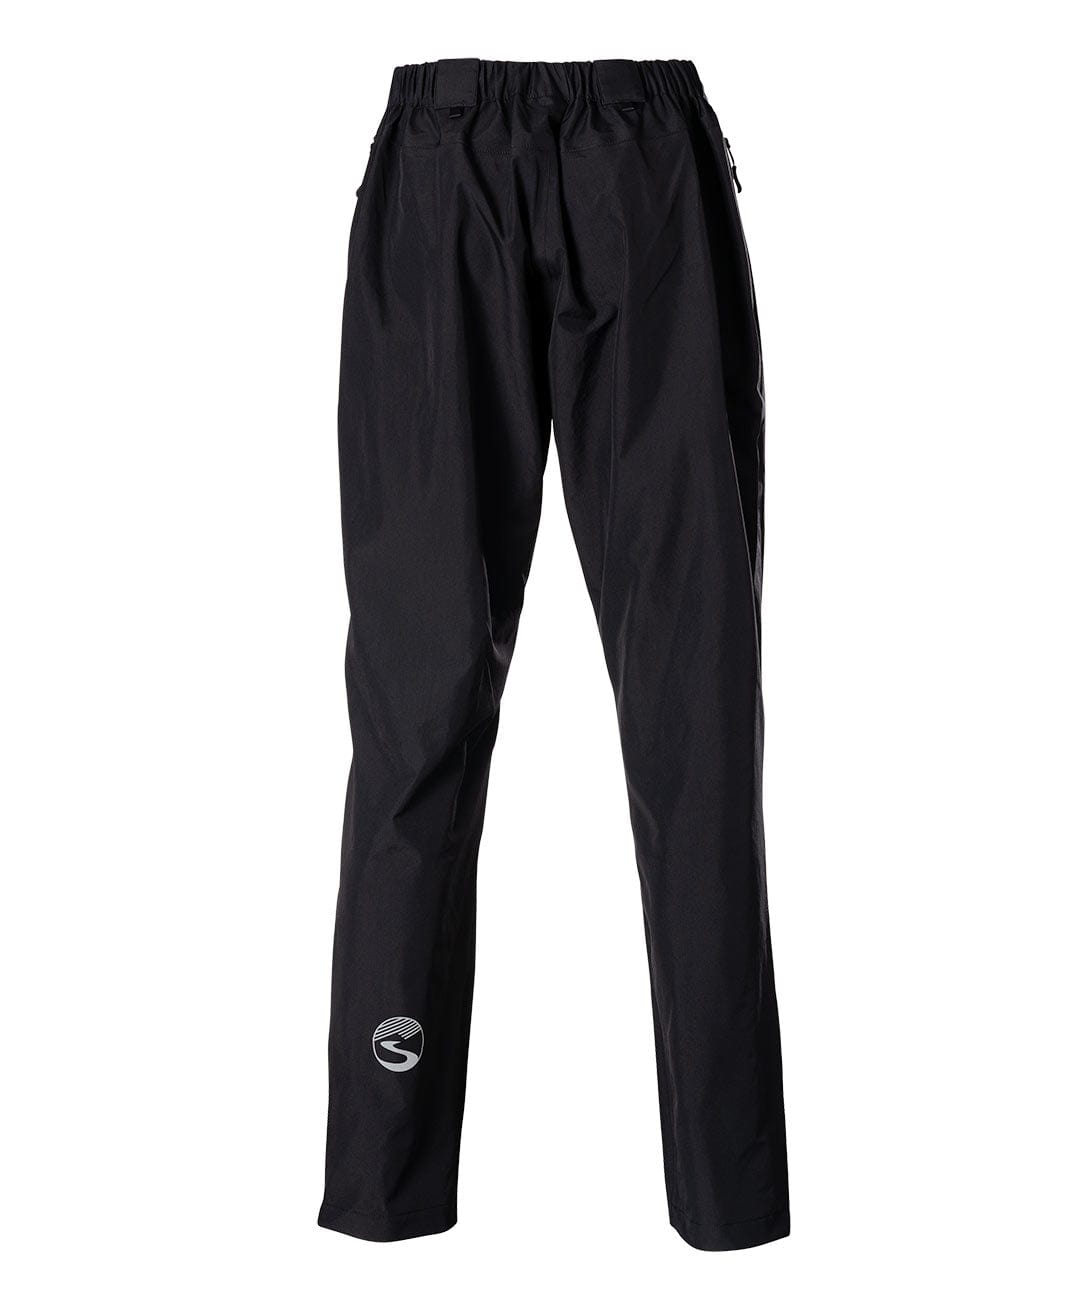 Women’s Standard Tapered Pants | The North Face Canada